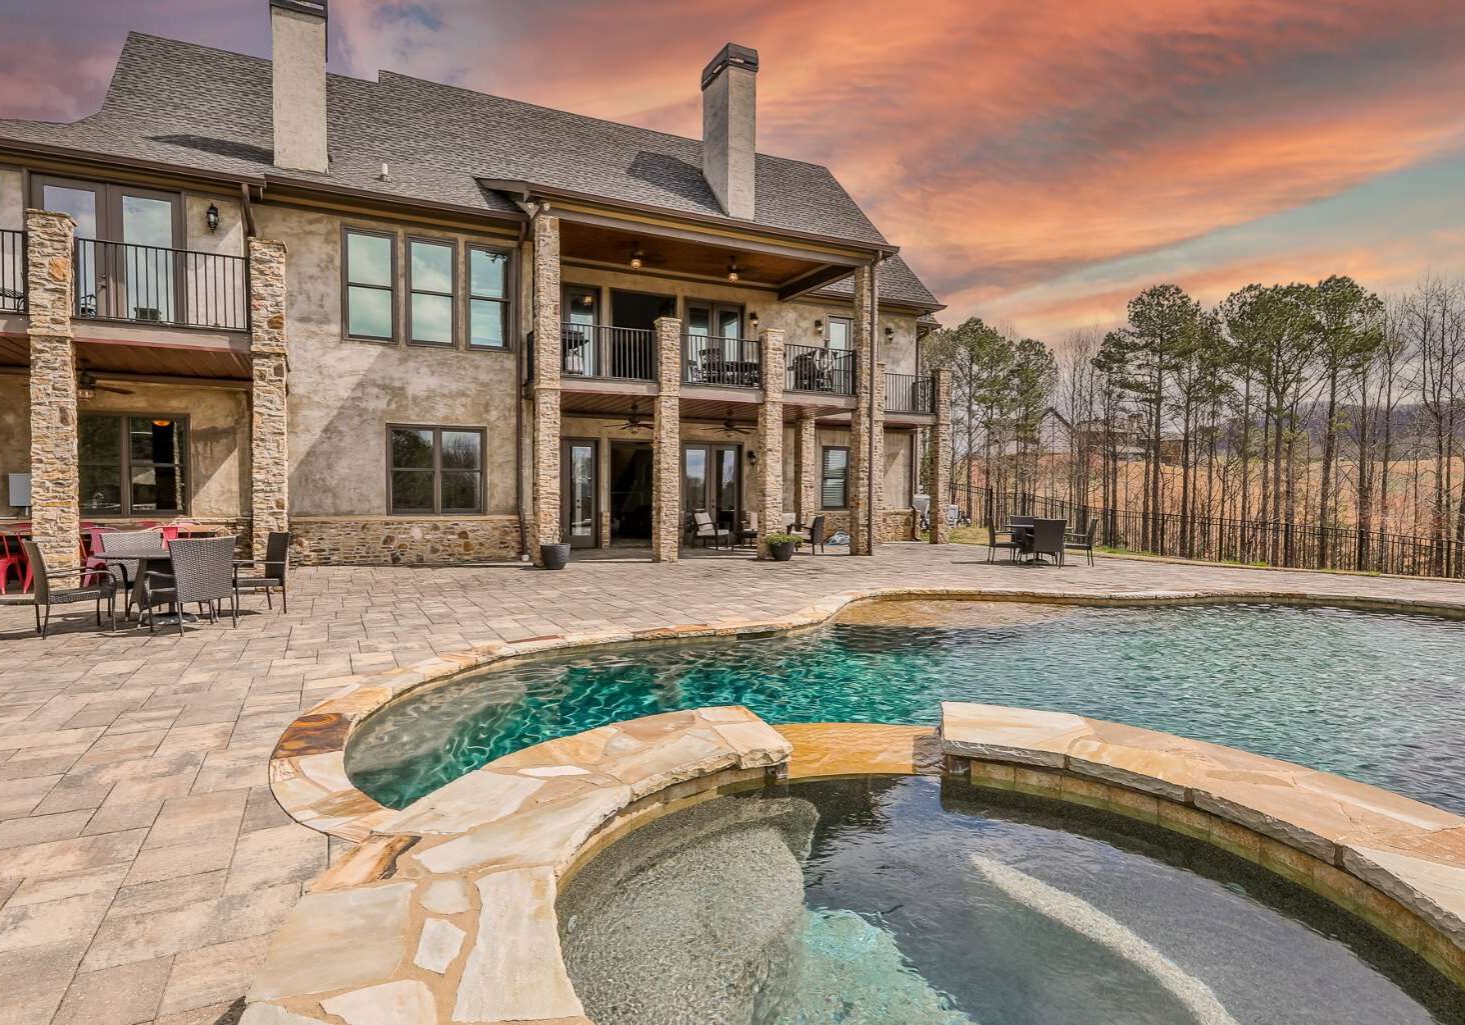 A large pool with a hot tub in the middle of it.